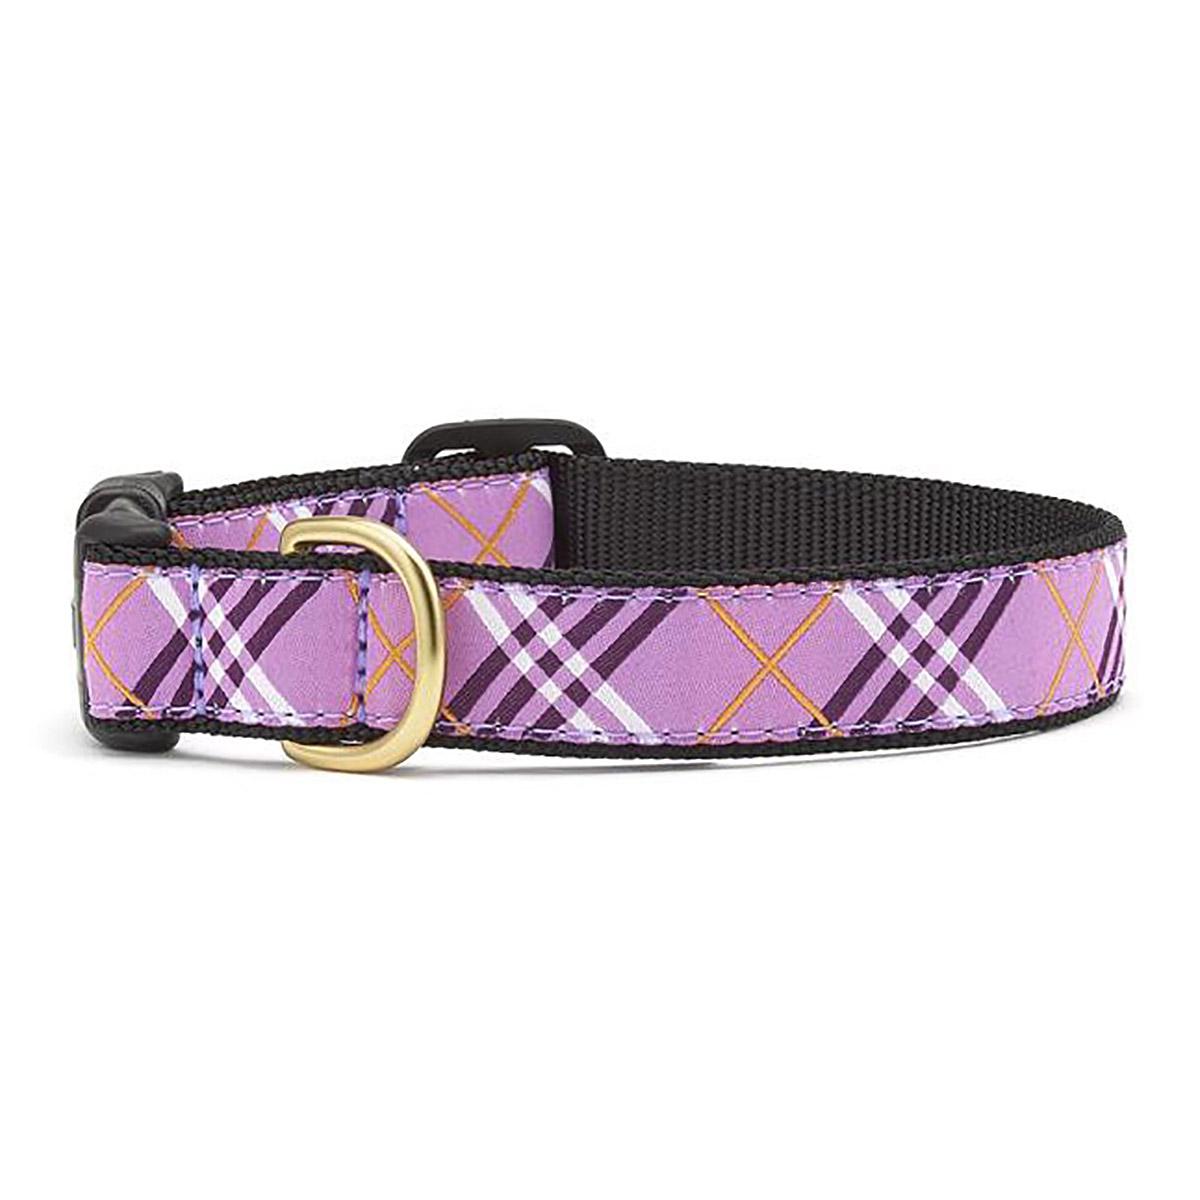 Lavender Lattice Dog Collar by Up Country